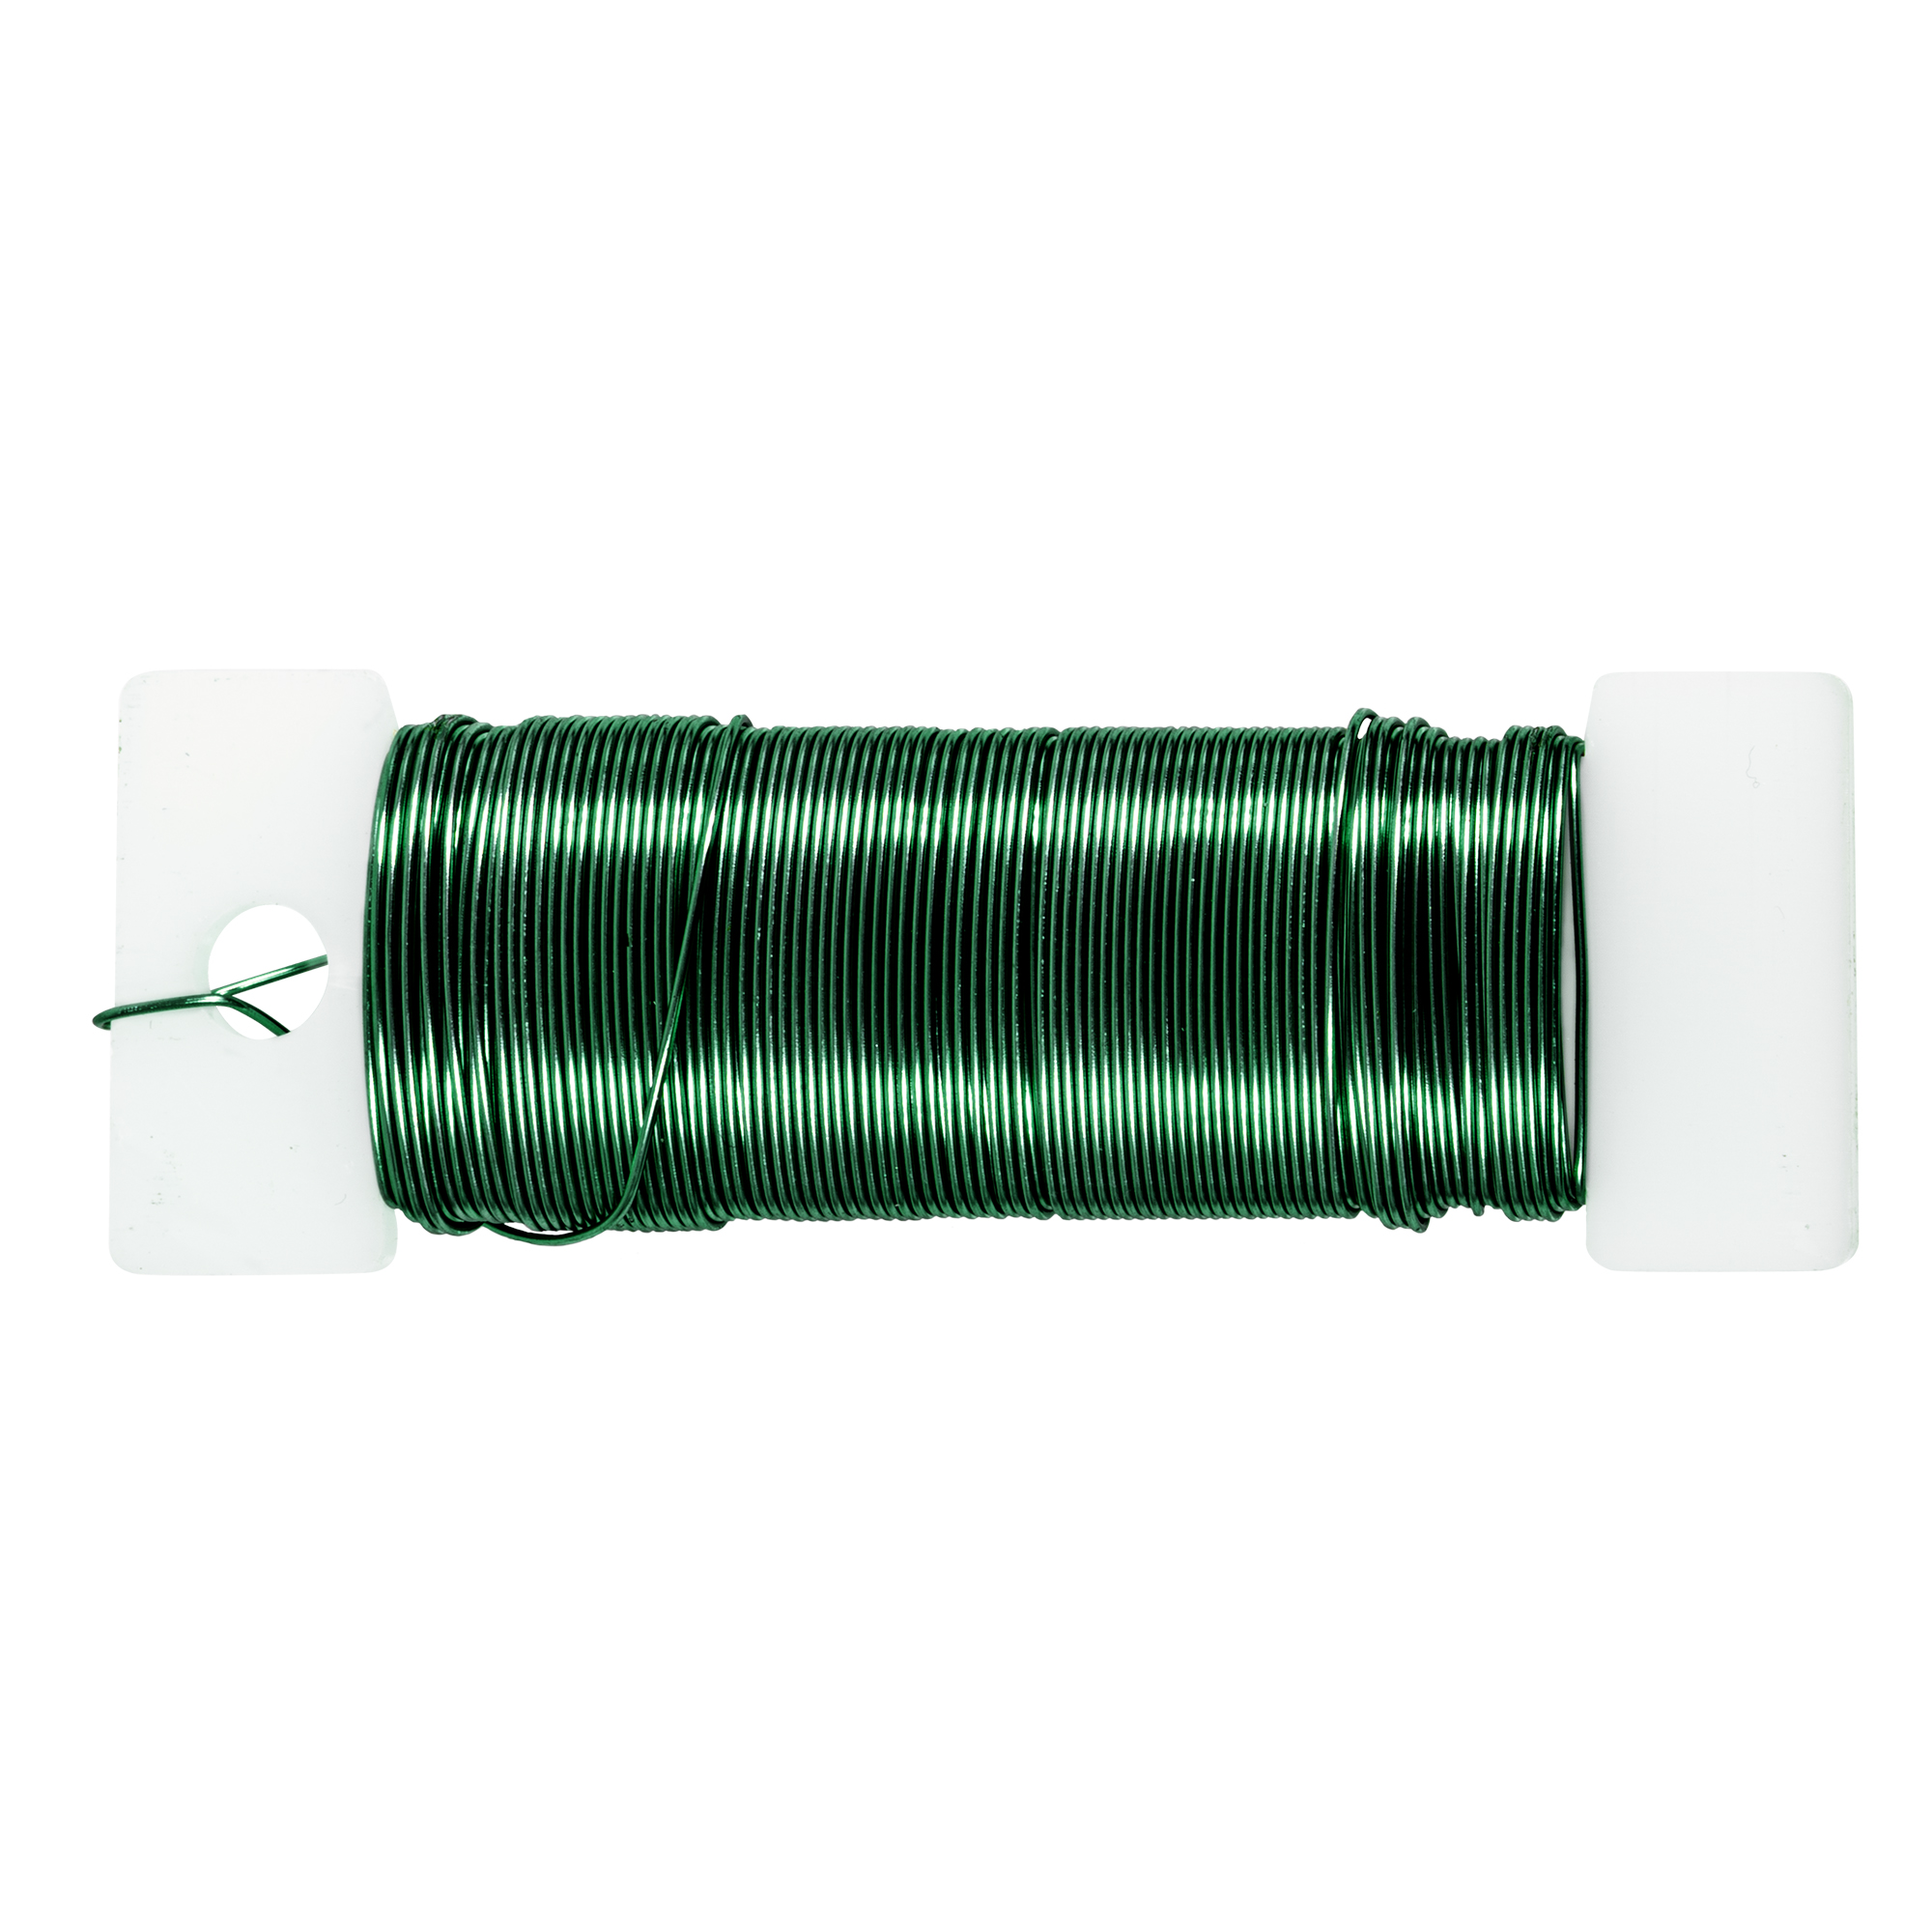 22 Gauge Floral Wire 115ft/Roll - Green